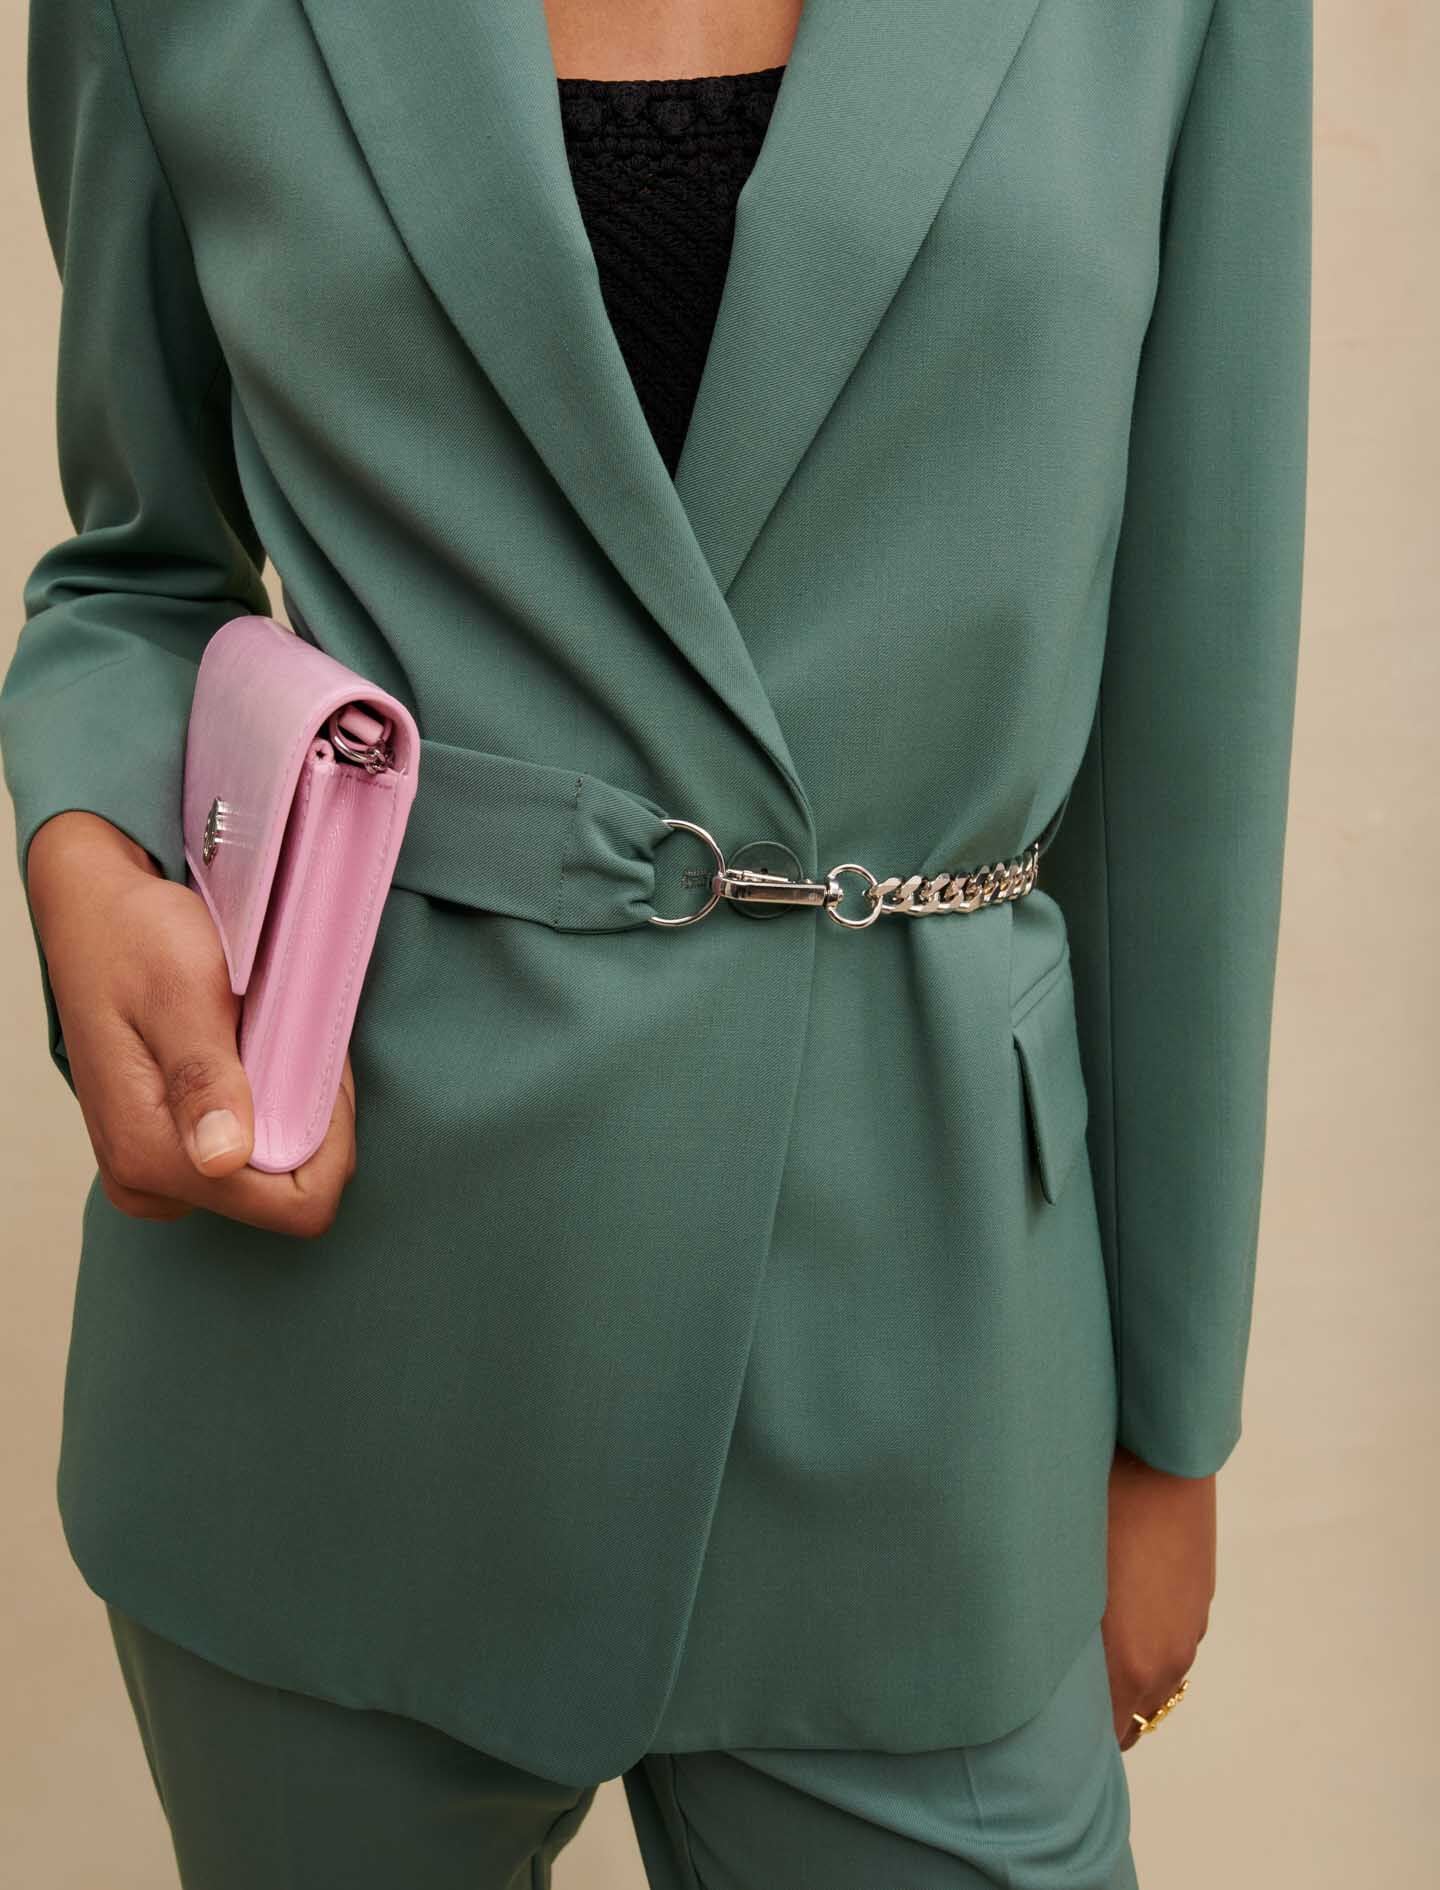 Green-tailored jacket with chain belt